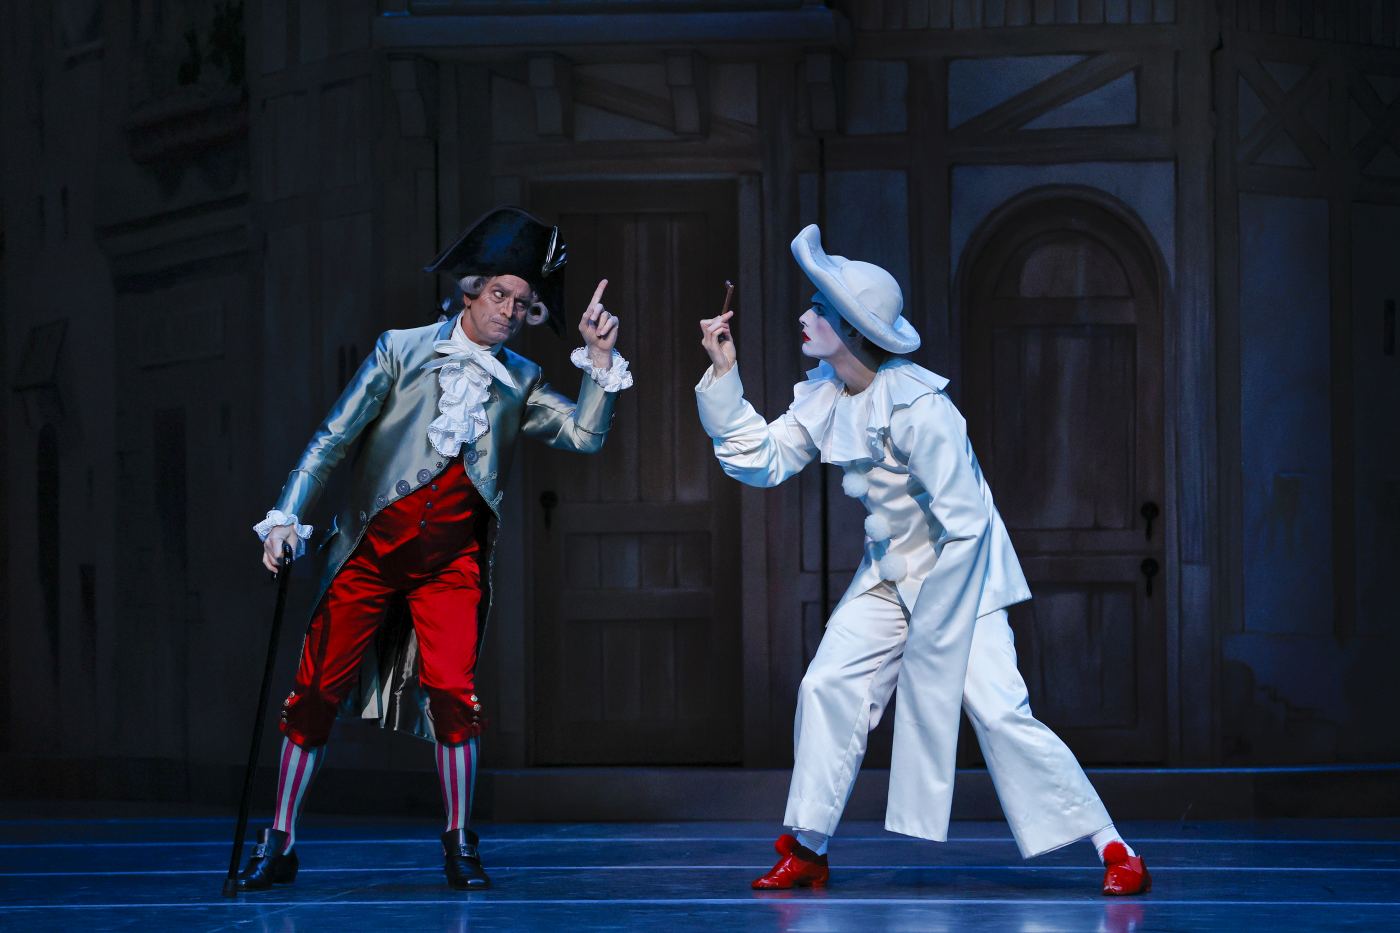 2. S.Heathcote (Cassandre) and C.Linnane (Pierrot), “Harlequinade” by M.Petipa, additional choreography by A.Ratmansky; The Australian Ballet 2022 © J.Busby